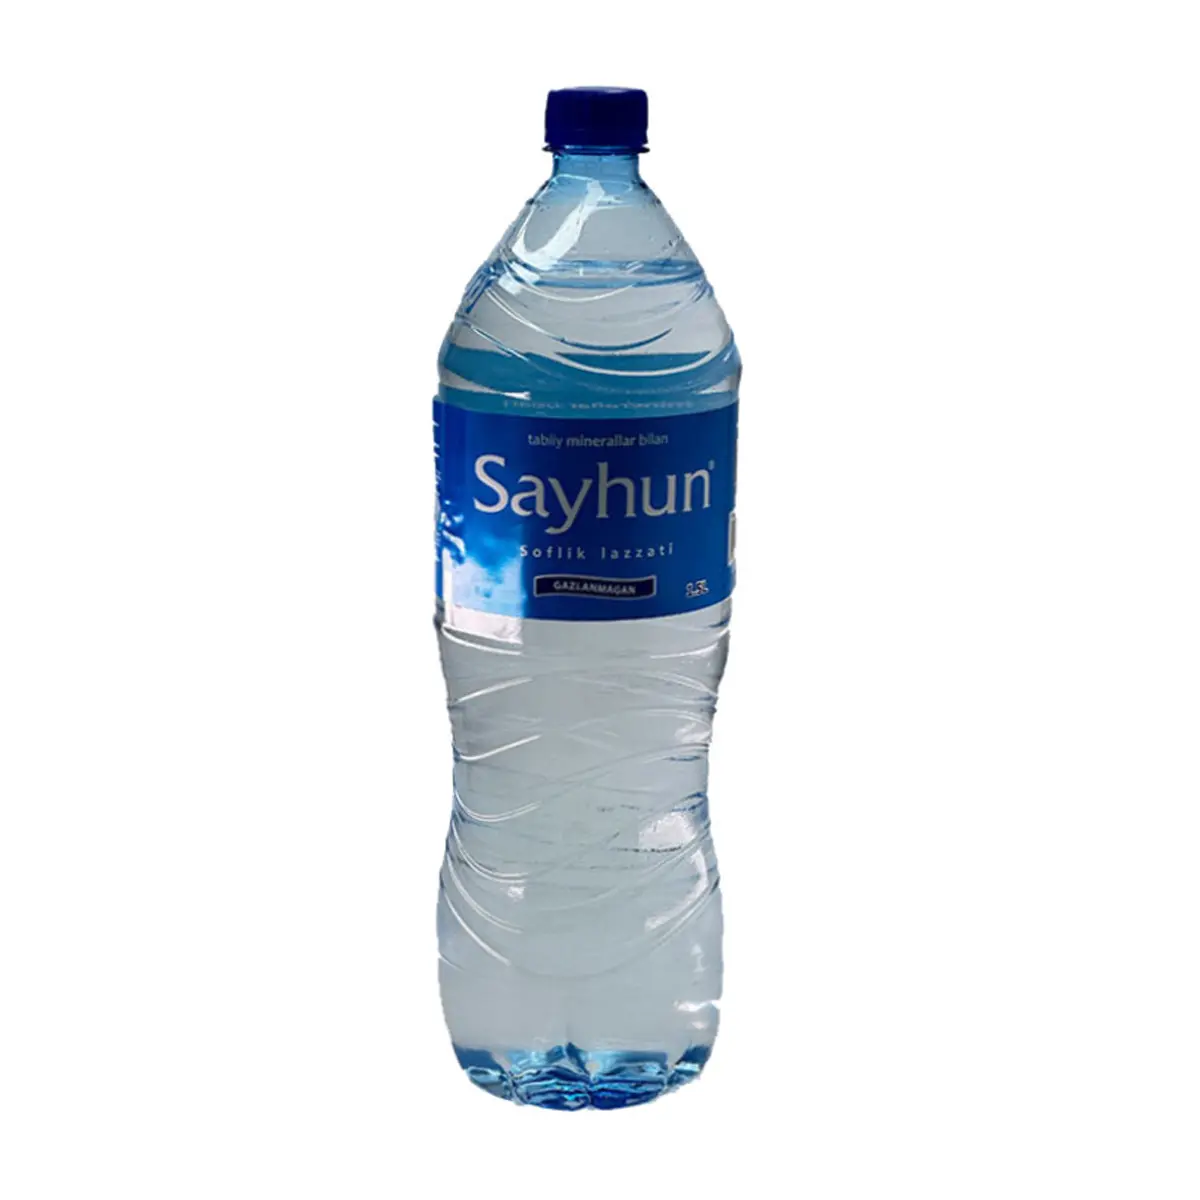 Quality clean water - 1,5 litre bottle natural product guarantee of quality goods